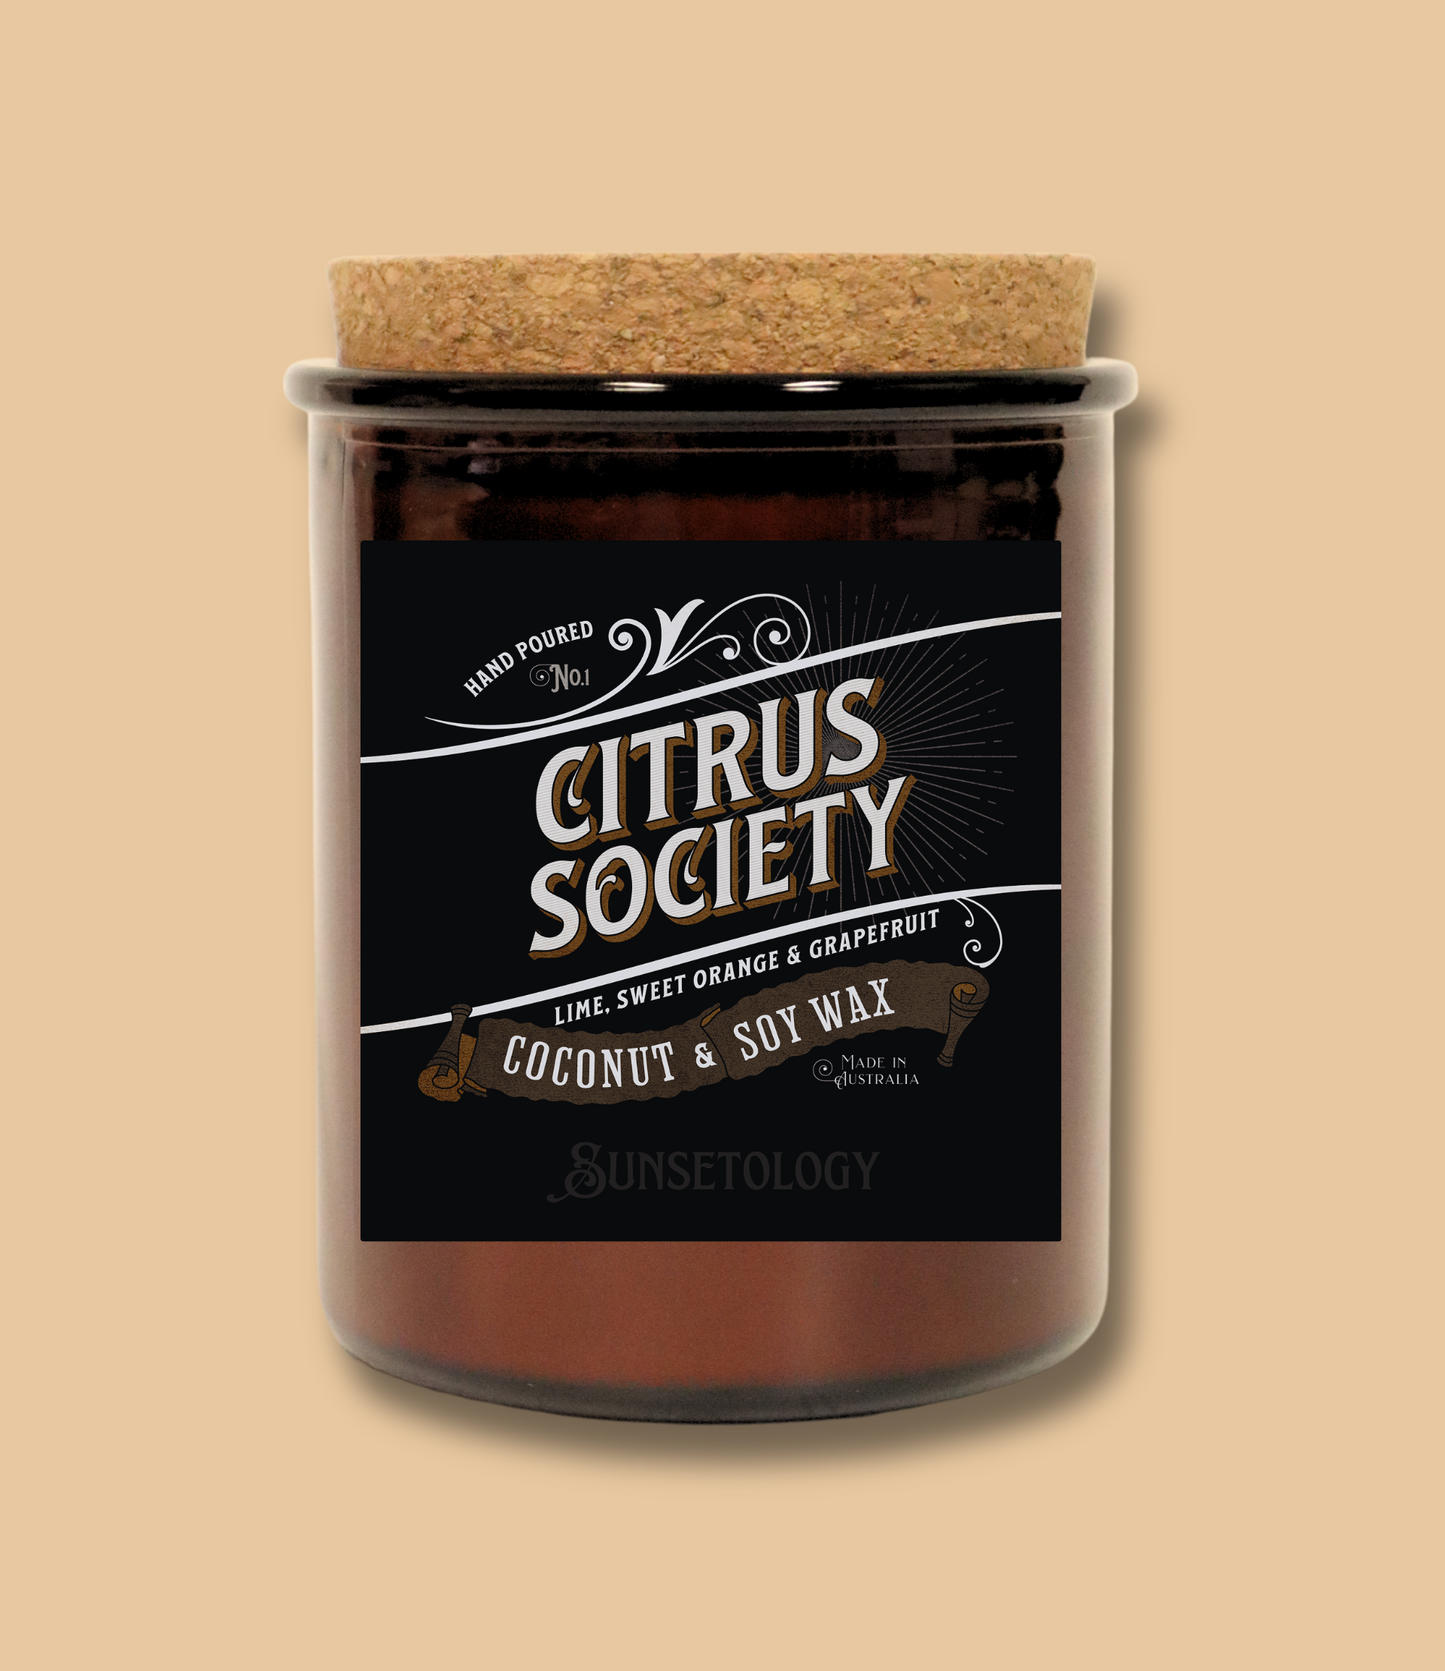 Citrus Society - Scented candle